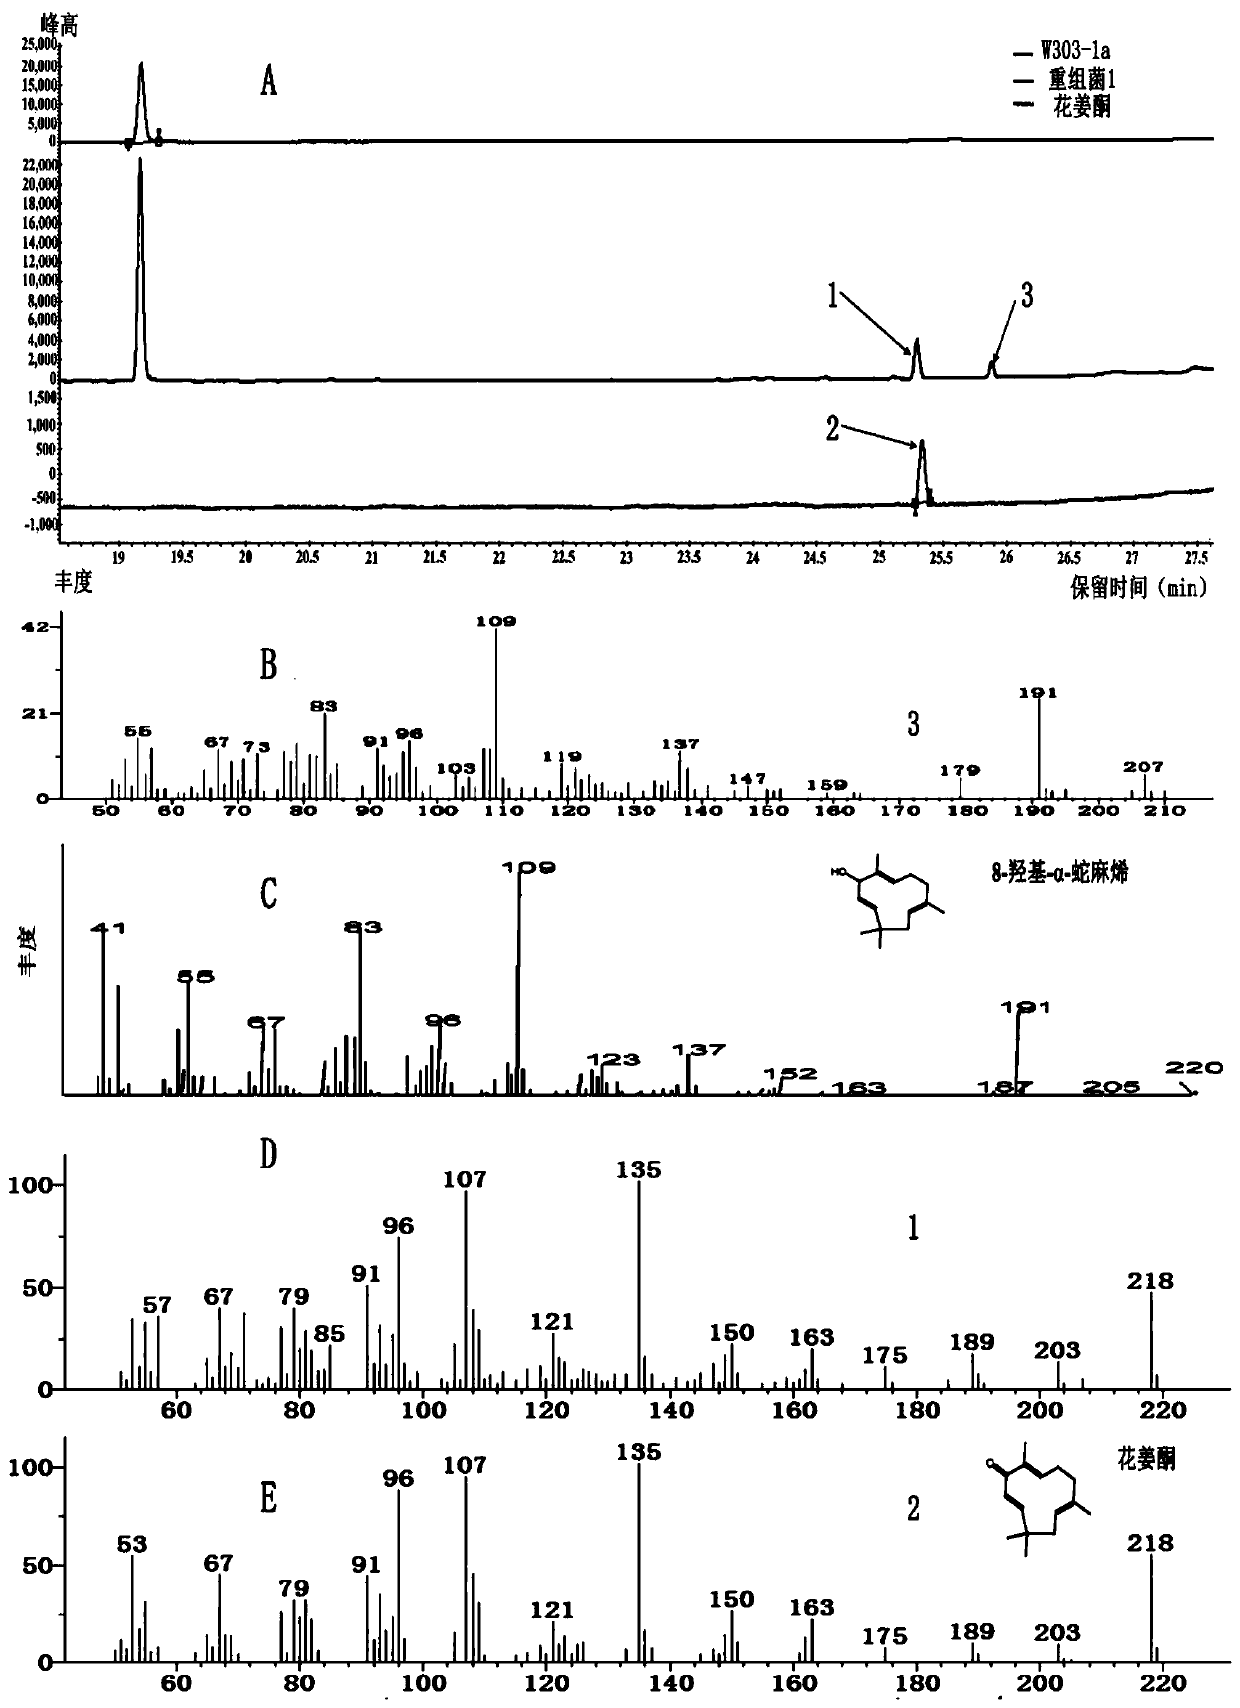 Saccharomyces cerevisiae recombinant bacterium capable of producing alpha-humulene, 8-hydroxy-alpha-humulene and zerumbone and construction method thereof